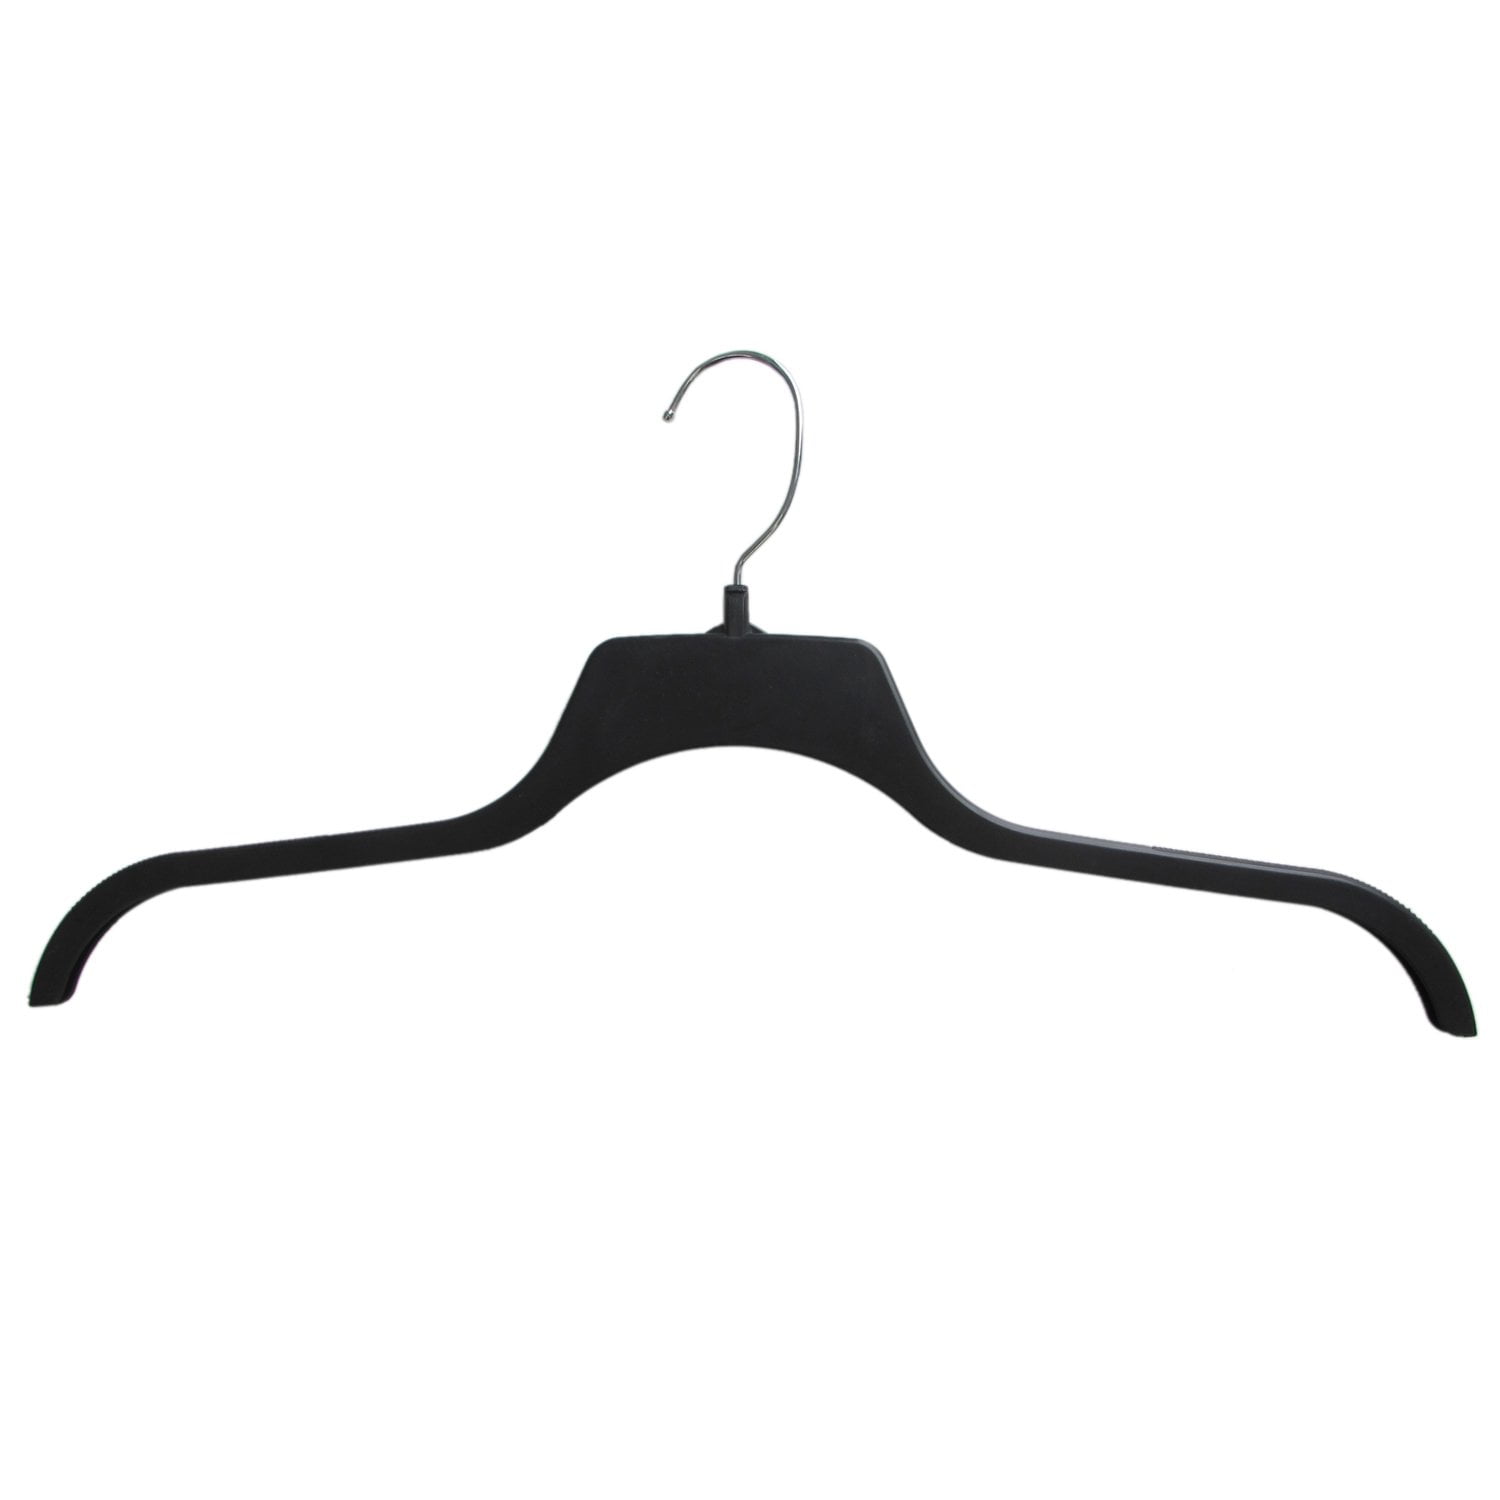  Hanger Central Space-Saving, Durable Black Plastic Clothes  Hangers, Bulk, Non-Slip Surface 360° Swivel Hook, Perfect for T-Shirts,  Oversize Garments, Coats, and Organization (19' (50 Pack)) : Home & Kitchen